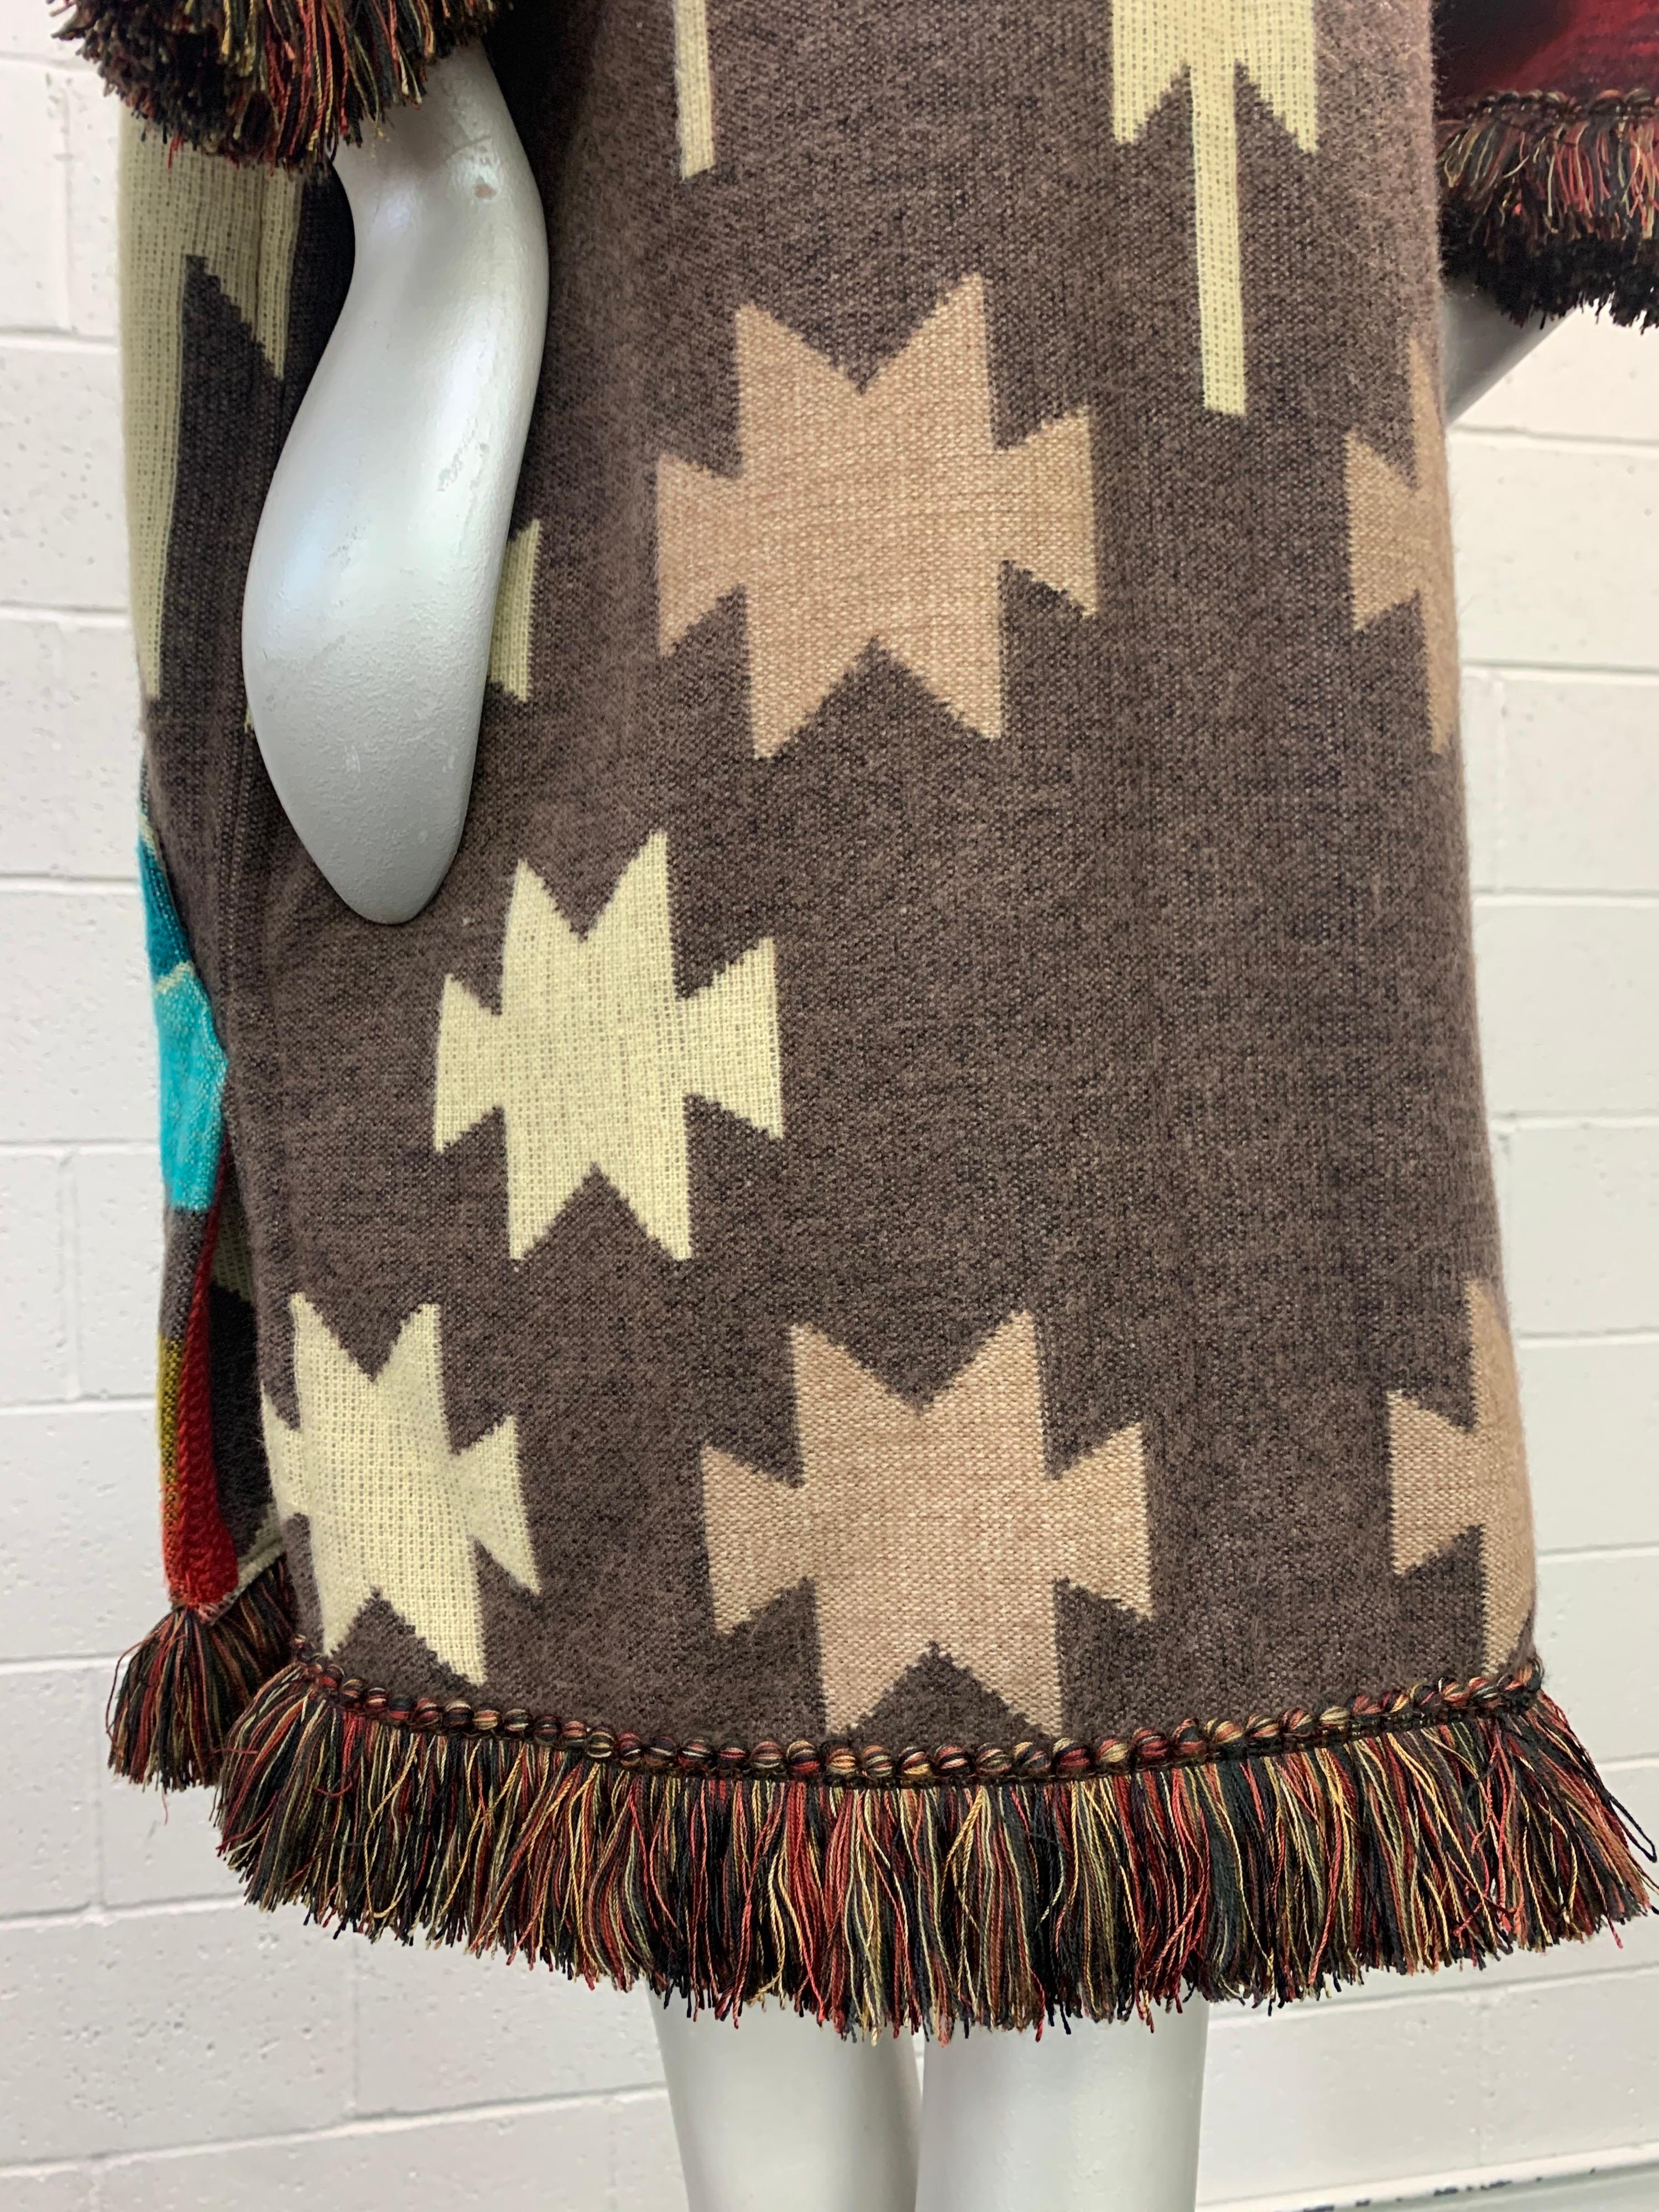 Torso Creations Ecuadorian Woven Blanket Double Zip Hooded Jacket W/ Fringe Trim In New Condition For Sale In Gresham, OR